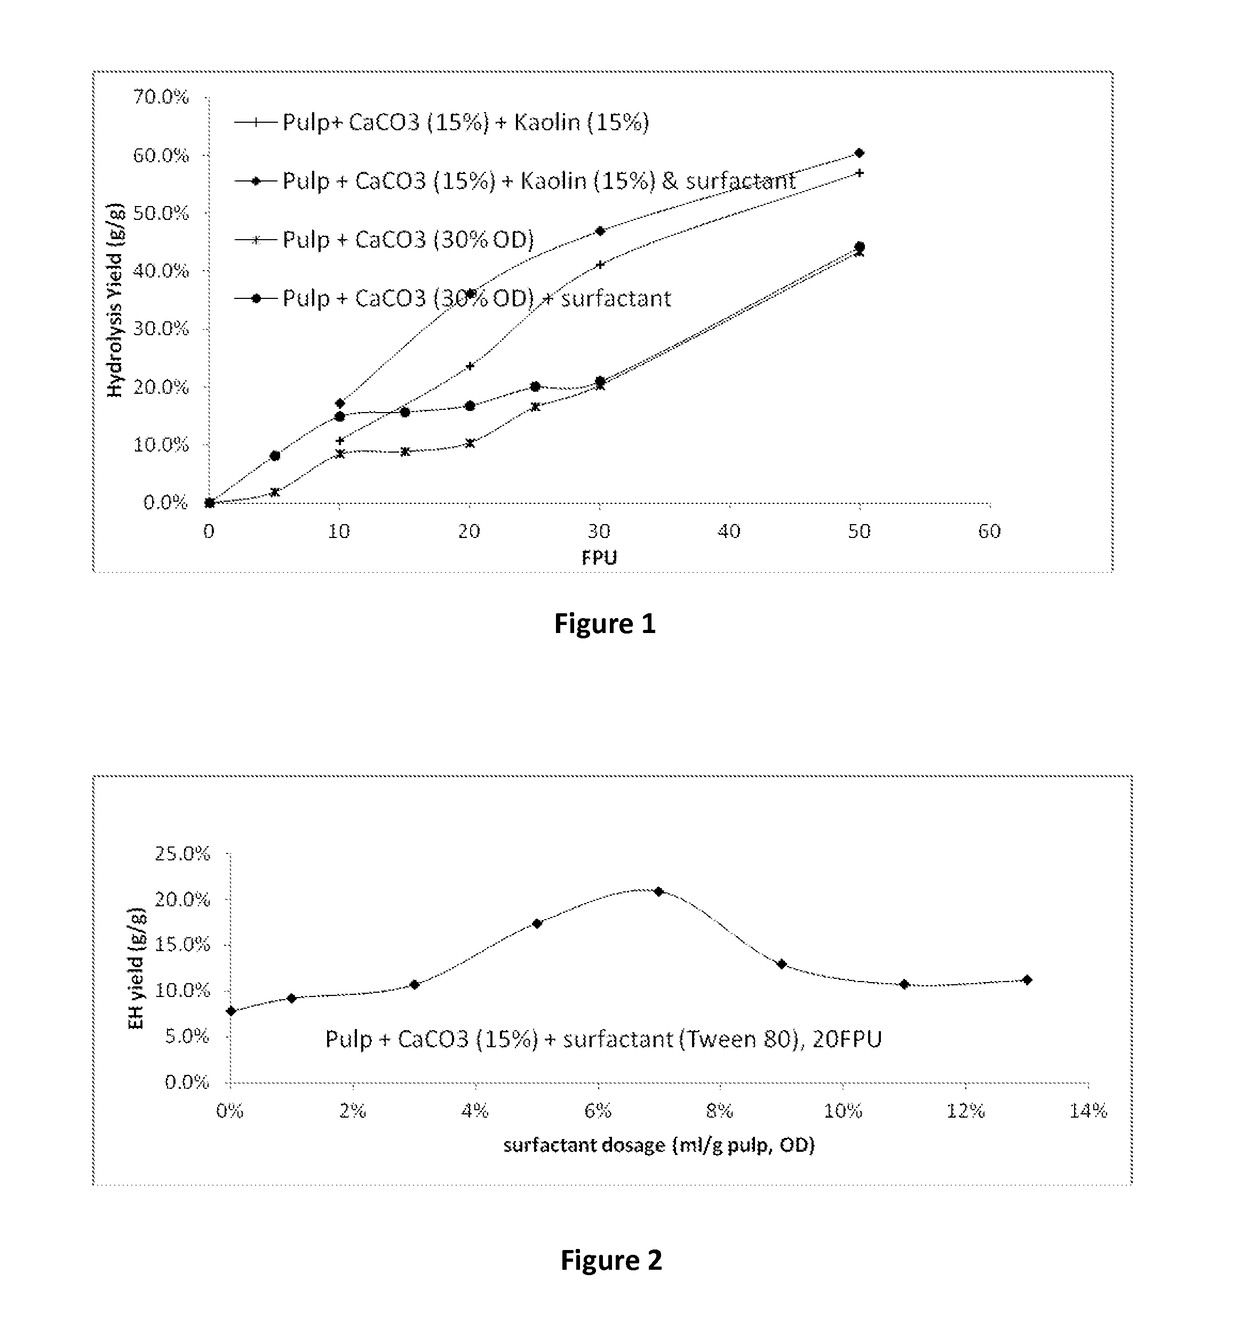 Hydrolysis of cellulosic fines in primary clarified sludge of paper mills and the addition of a surfactant to increase the yield